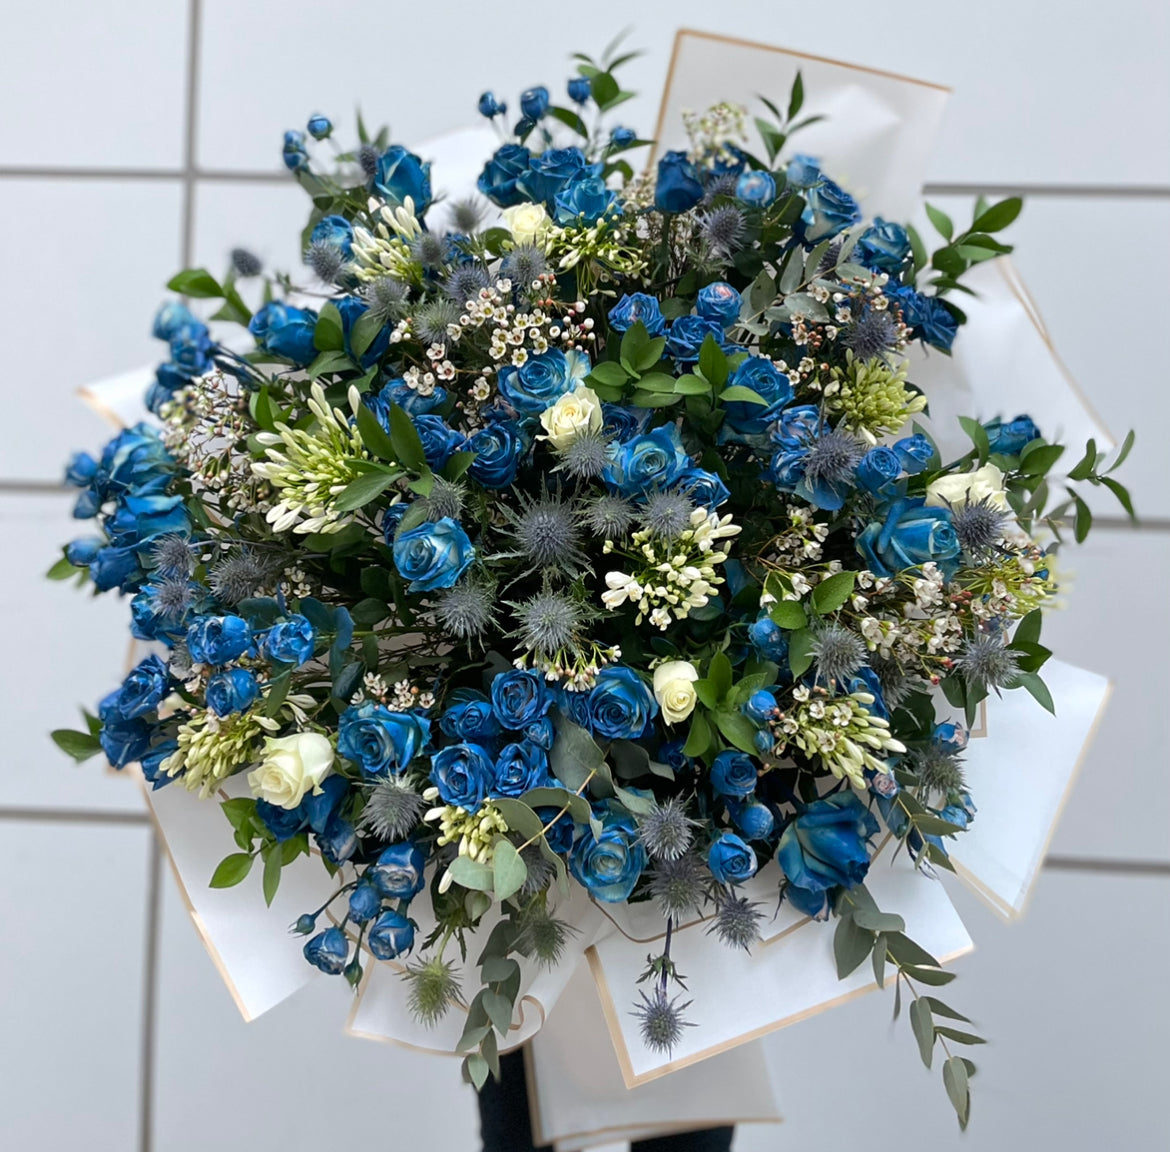 A giant bouquet of blue ross with greenery